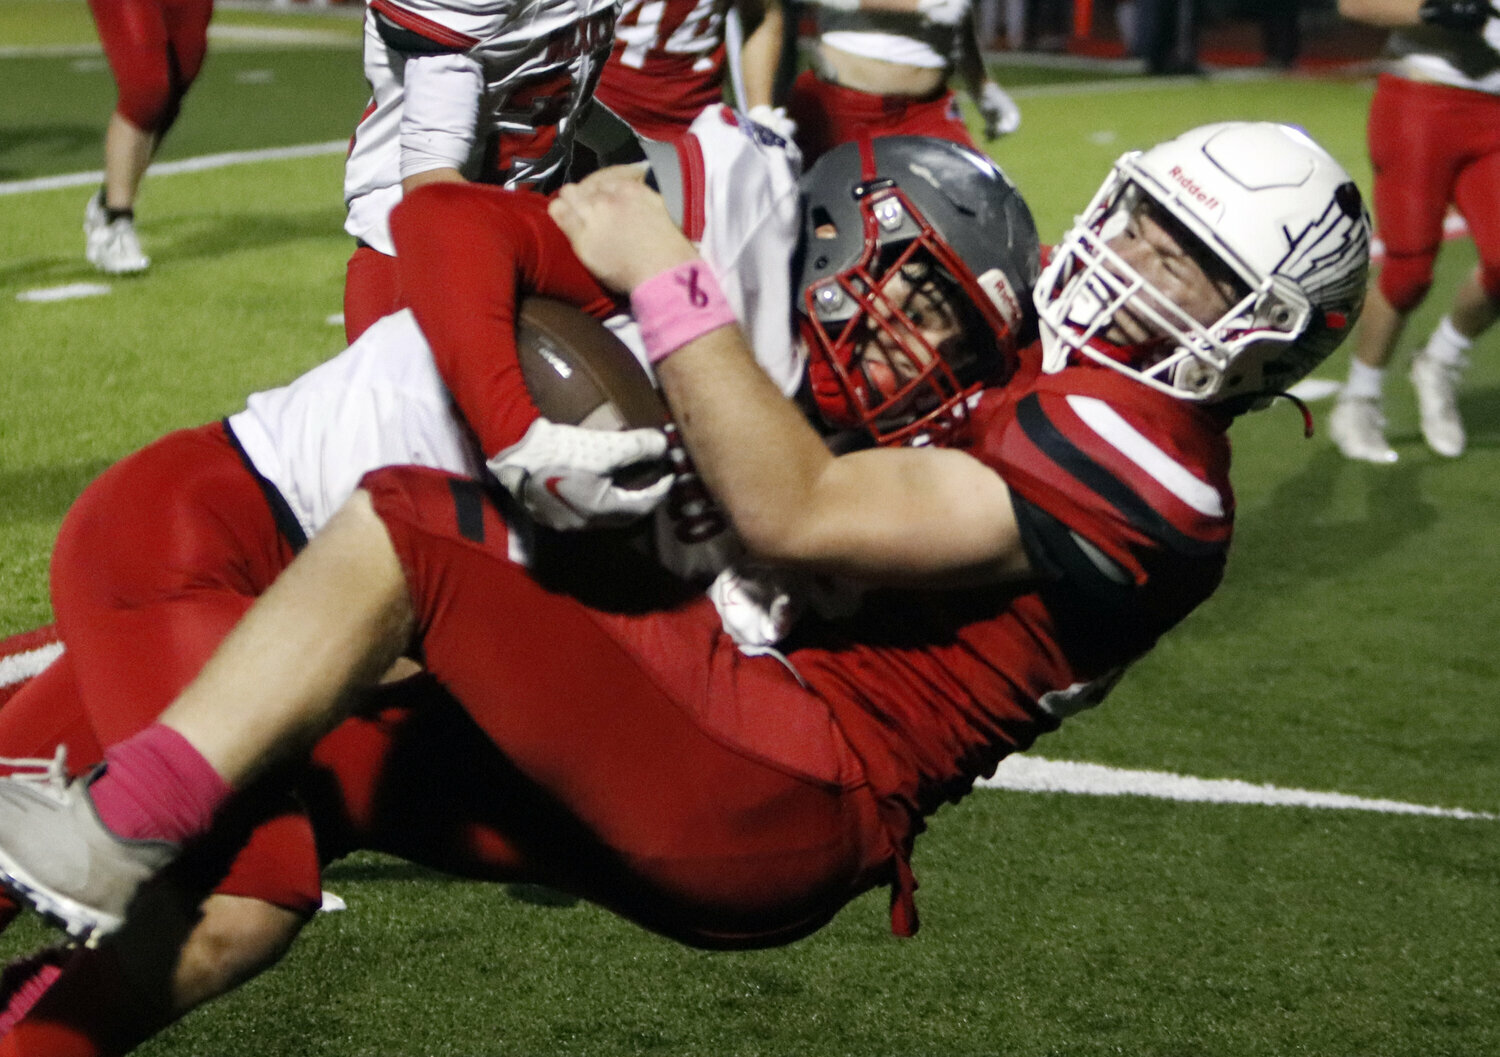 Kadin Stroer corrals the ball carrier during a game against Mexico.